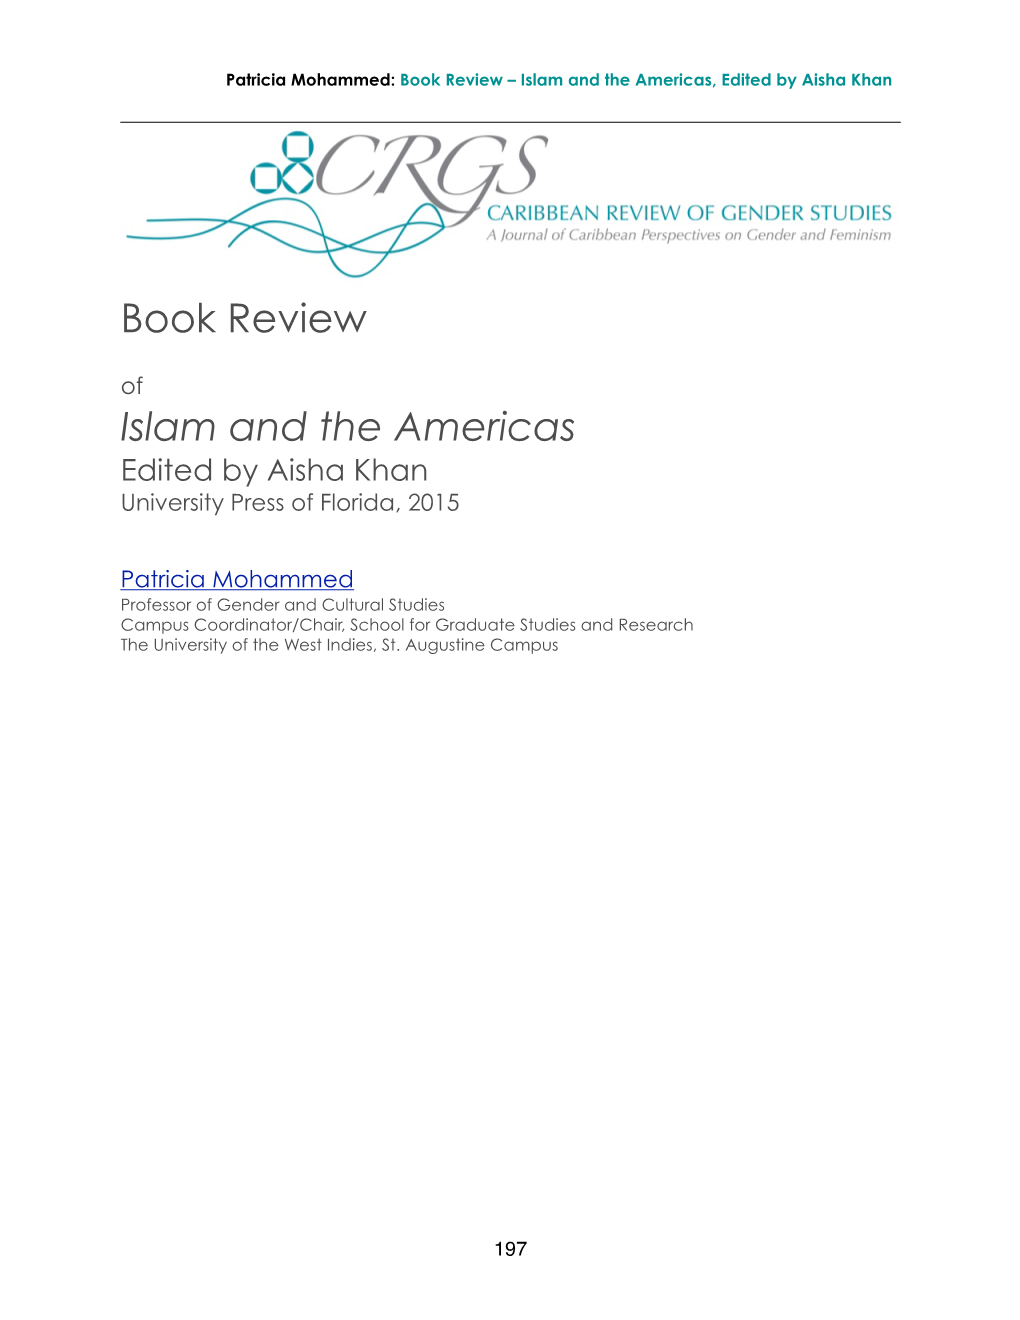 Review of Islam and the Americas, Edited by Aisha Khan